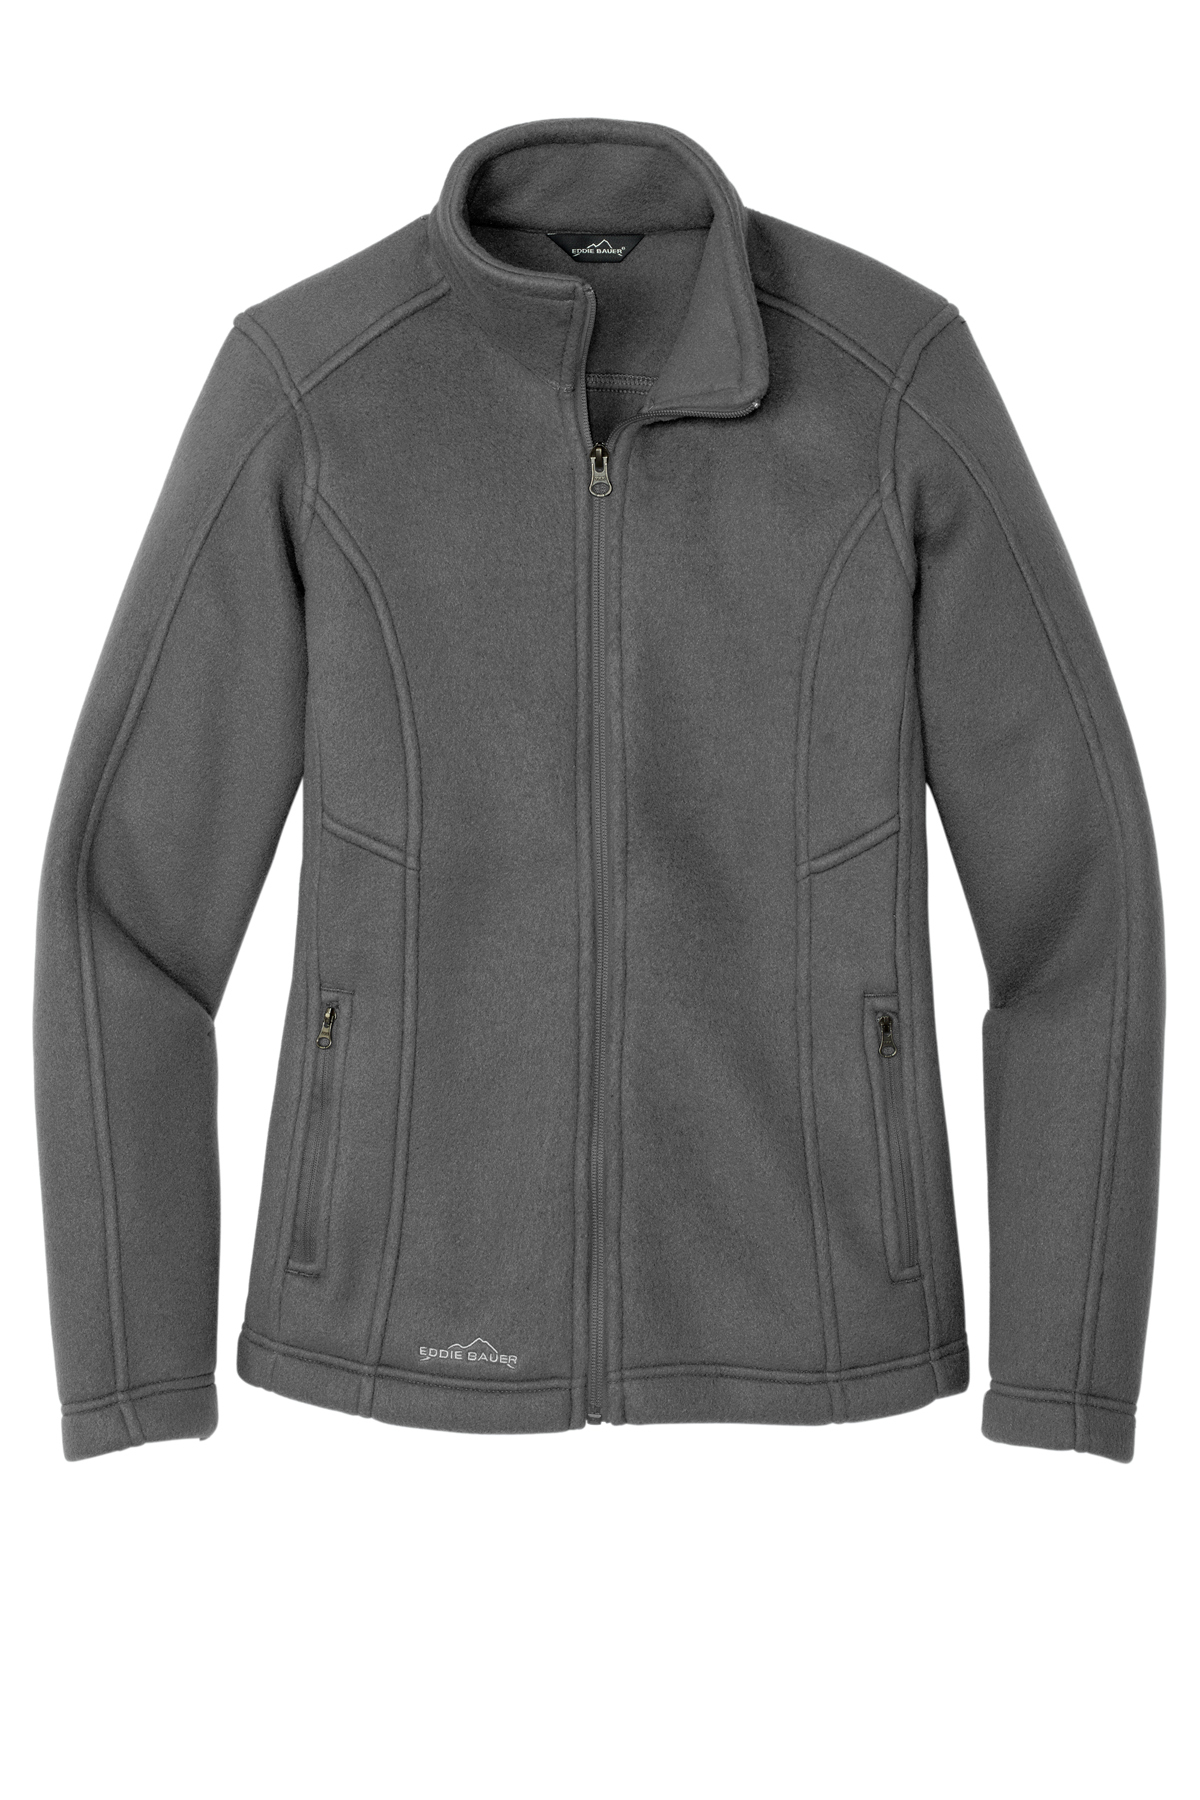 Eddie Bauer - Fleece-Lined Jacket Style EB520 - Casual Clothing